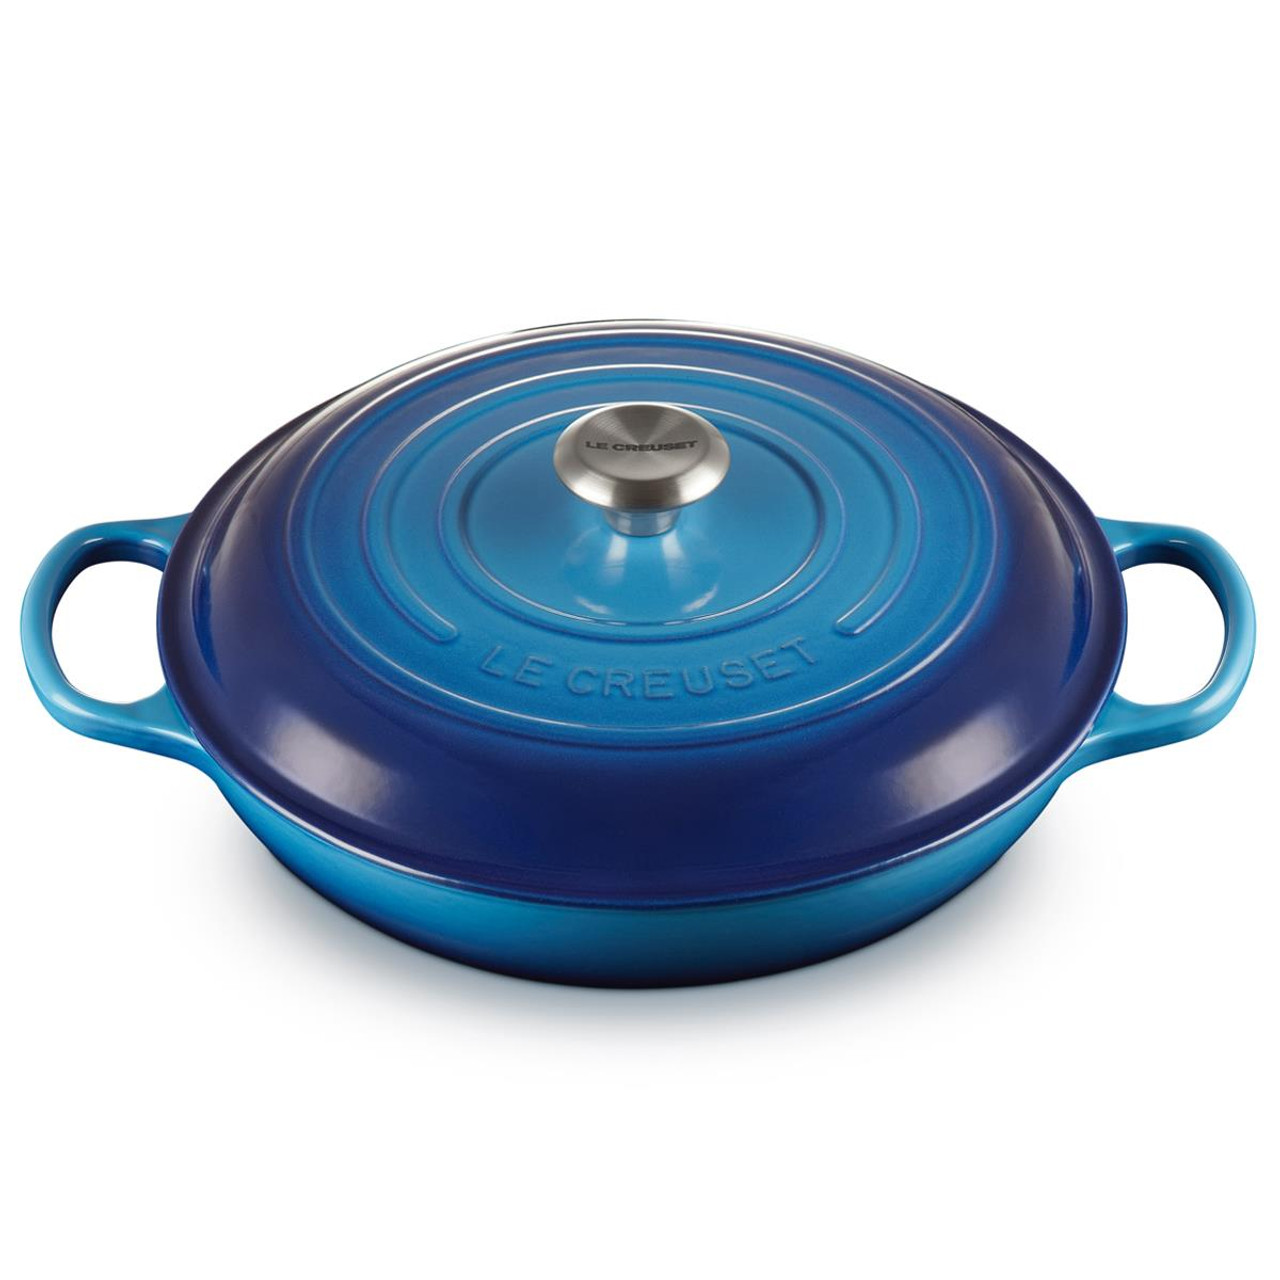 What is the ideal use for the Le Creuset Shallow Casserole dish?